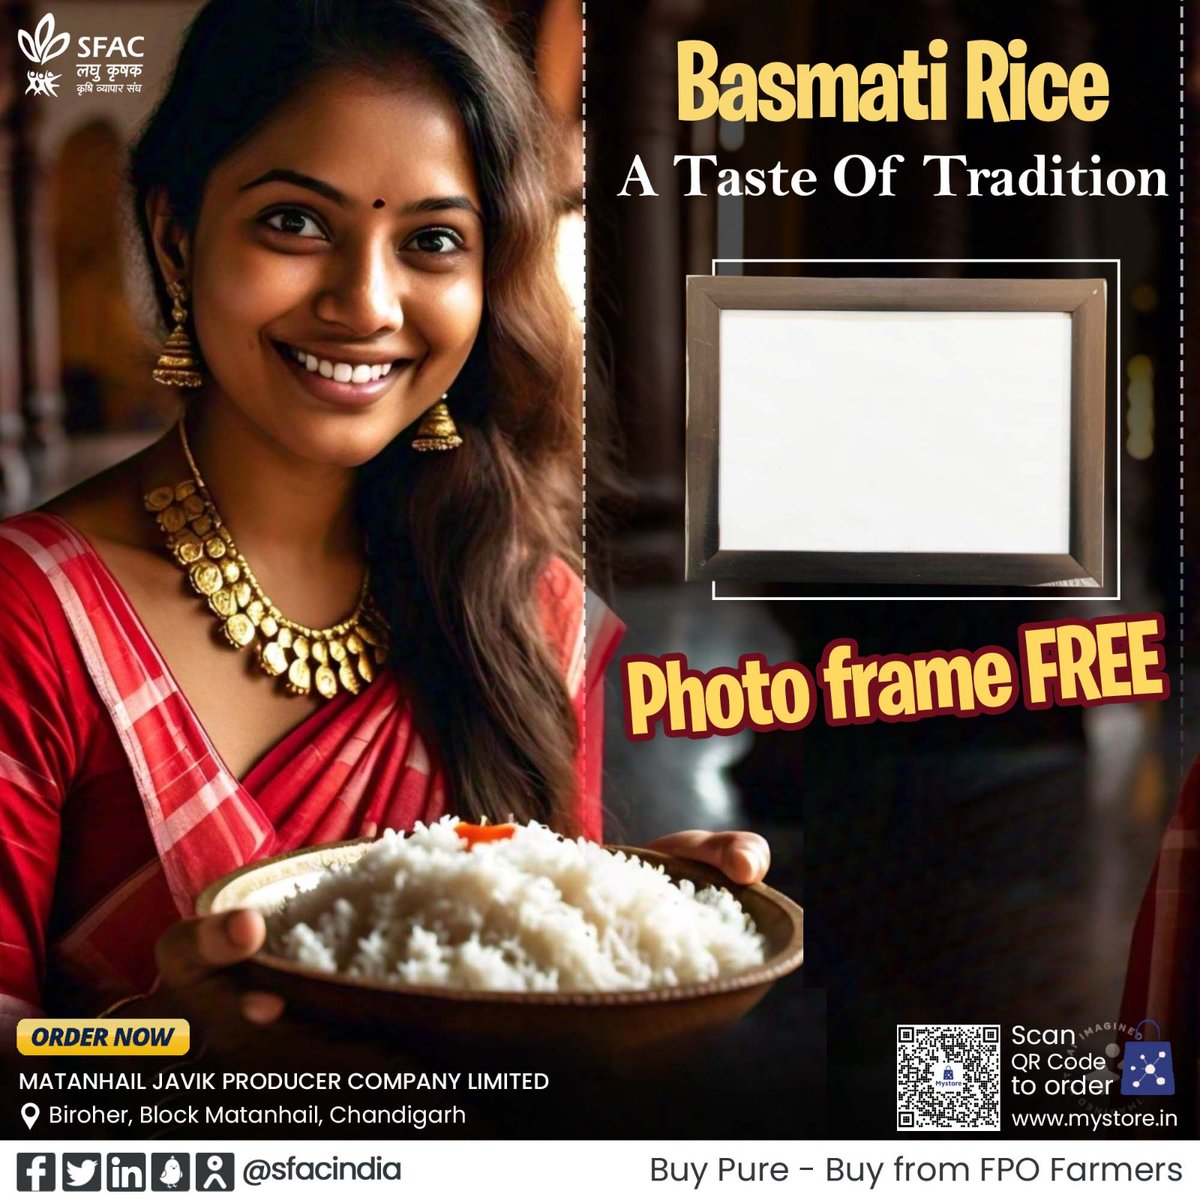 Famous for its aroma, fluffy texture, & superior taste, Basmati rice is ideal for making delicious traditional dishes like kheer.

Buy straight from FPO farmers👇

mystore.in/en/product/bas…

🍚

#VocalForLocal #healthychoices #healthyeating #healthyhabits #tastyrecipes #tasty